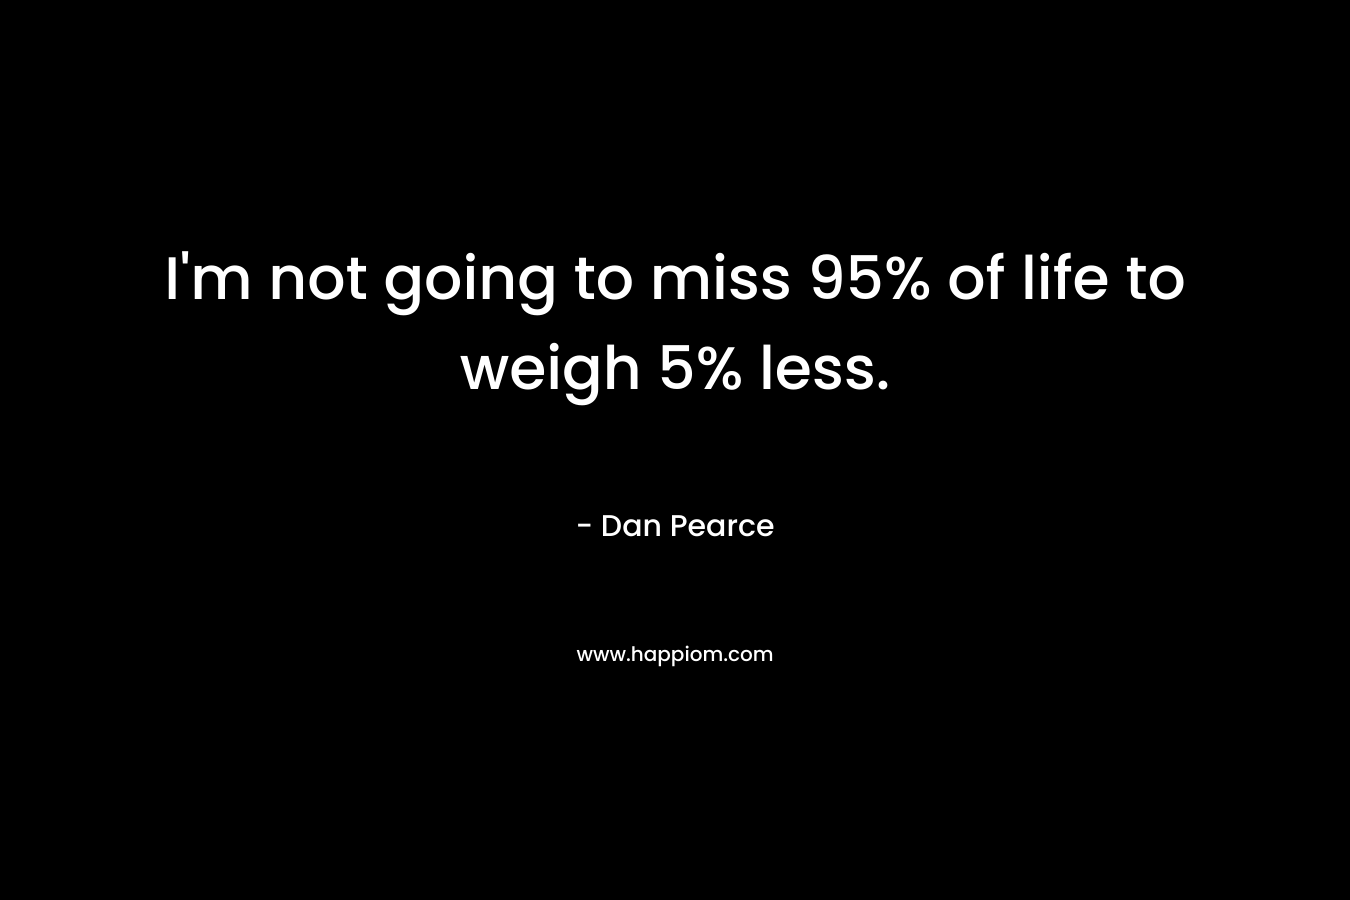 I'm not going to miss 95% of life to weigh 5% less.